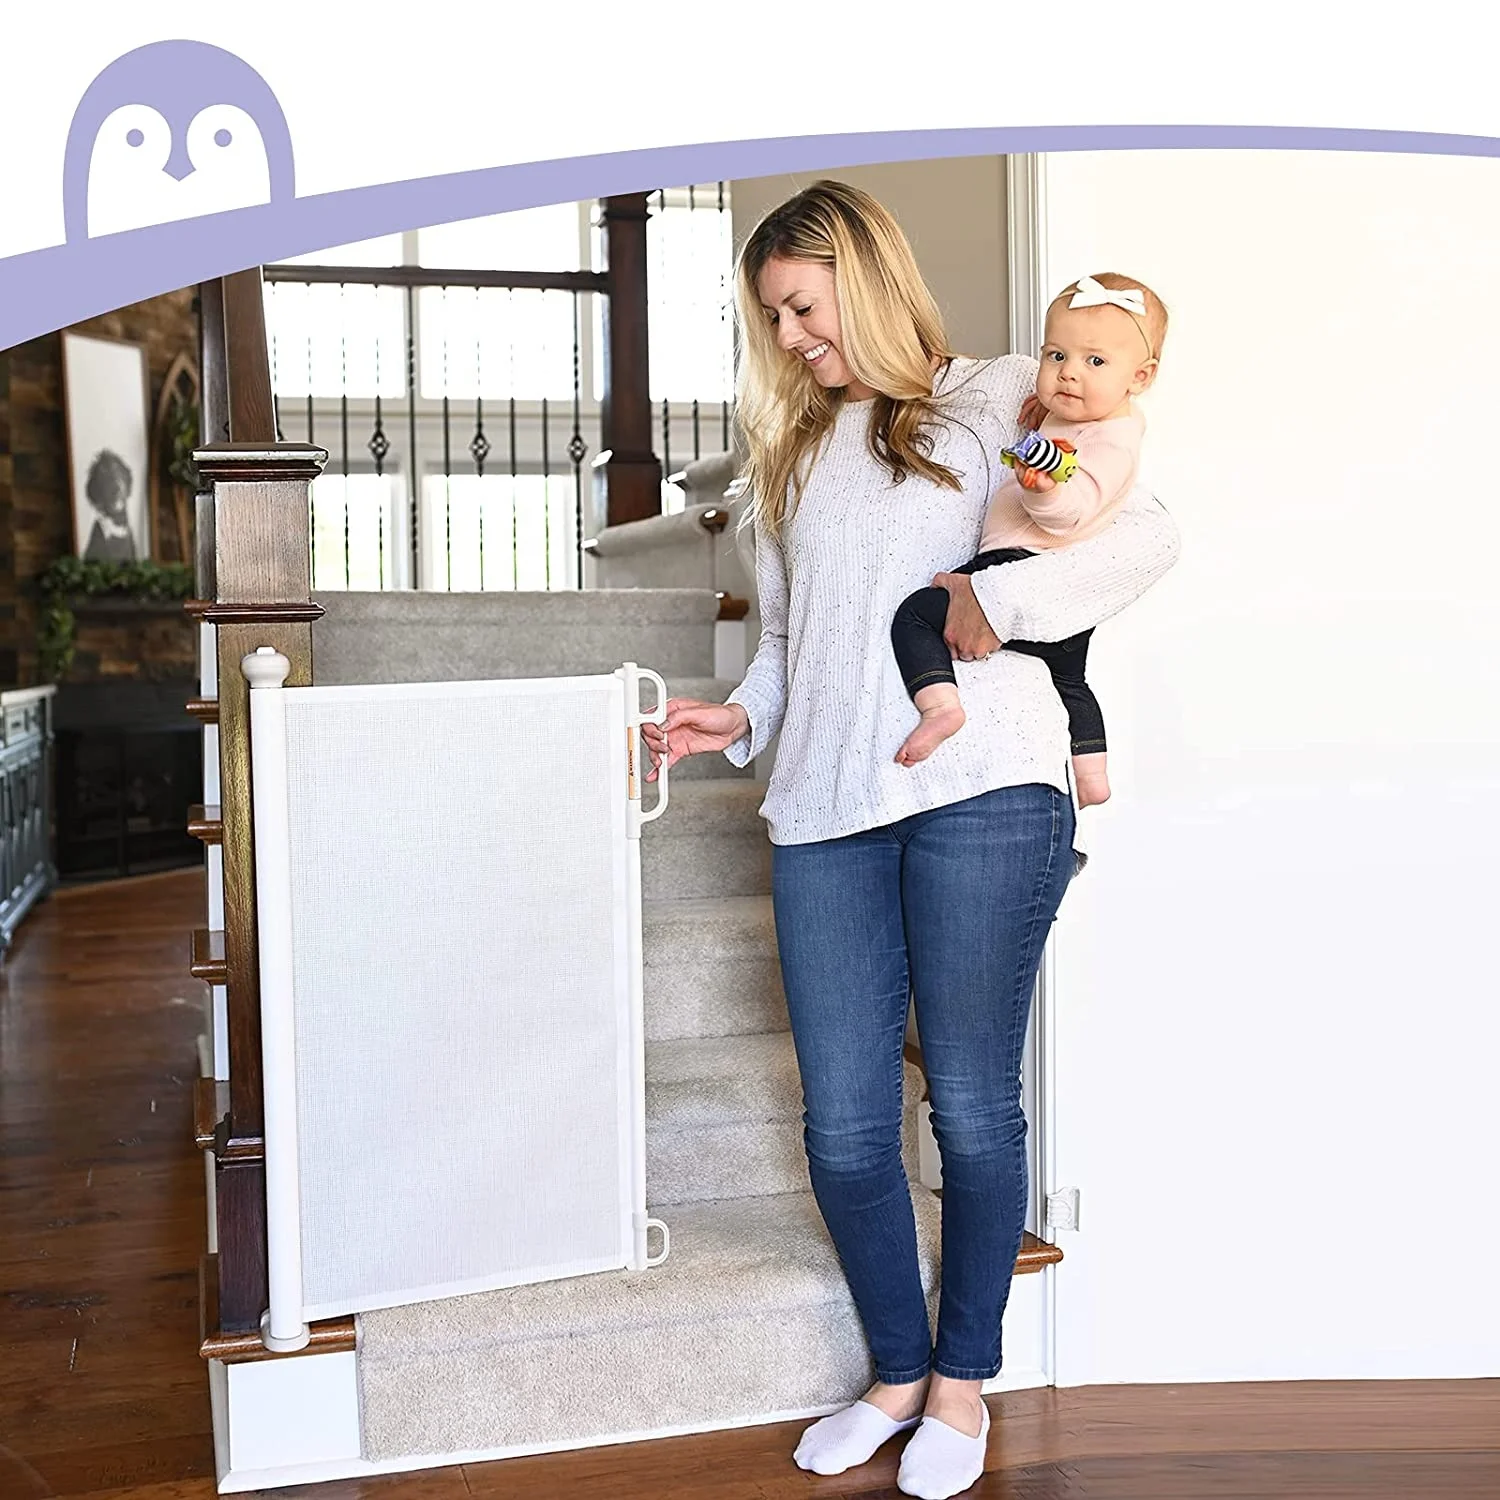 

Retractable Baby Gate, Mesh Dog Gate Safety Barrier for Kids or Pets,34" Tall, Extends up to 55" Wide, White black grey